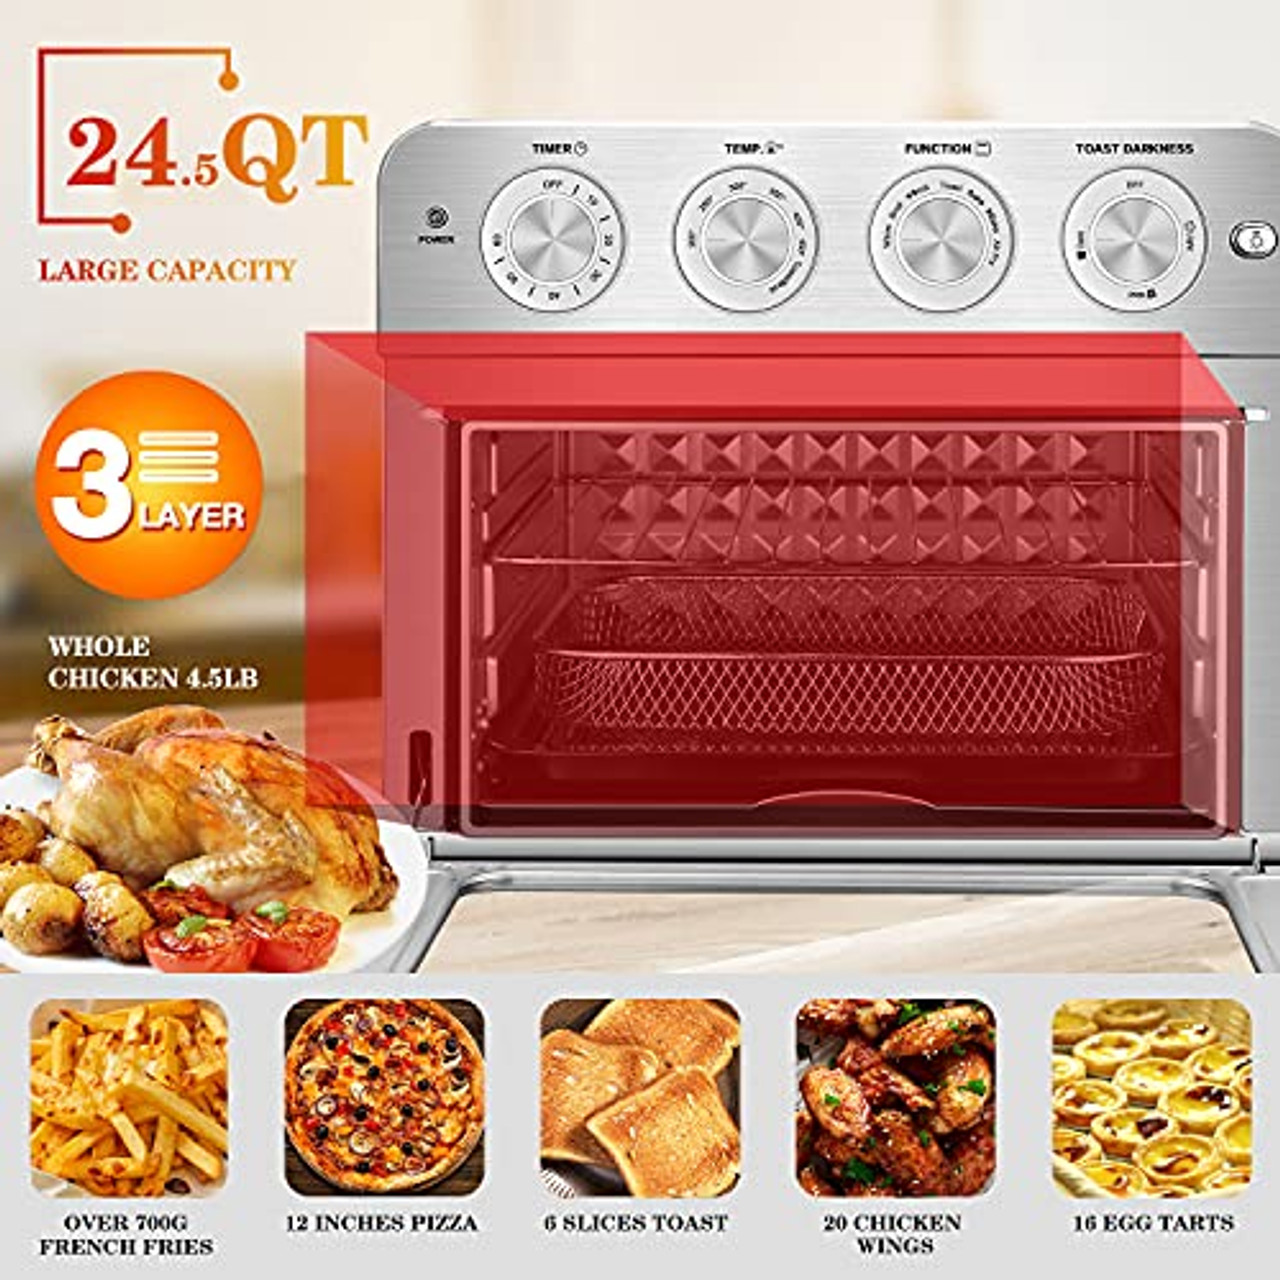 Geek Chef Air Fryer Toaster Oven Combo, 4 Slice Toaster Convection Air Fryer Oven Warm, Broil, Toast, Bake, Air Fry, Oil-Free, Accessories Included, S